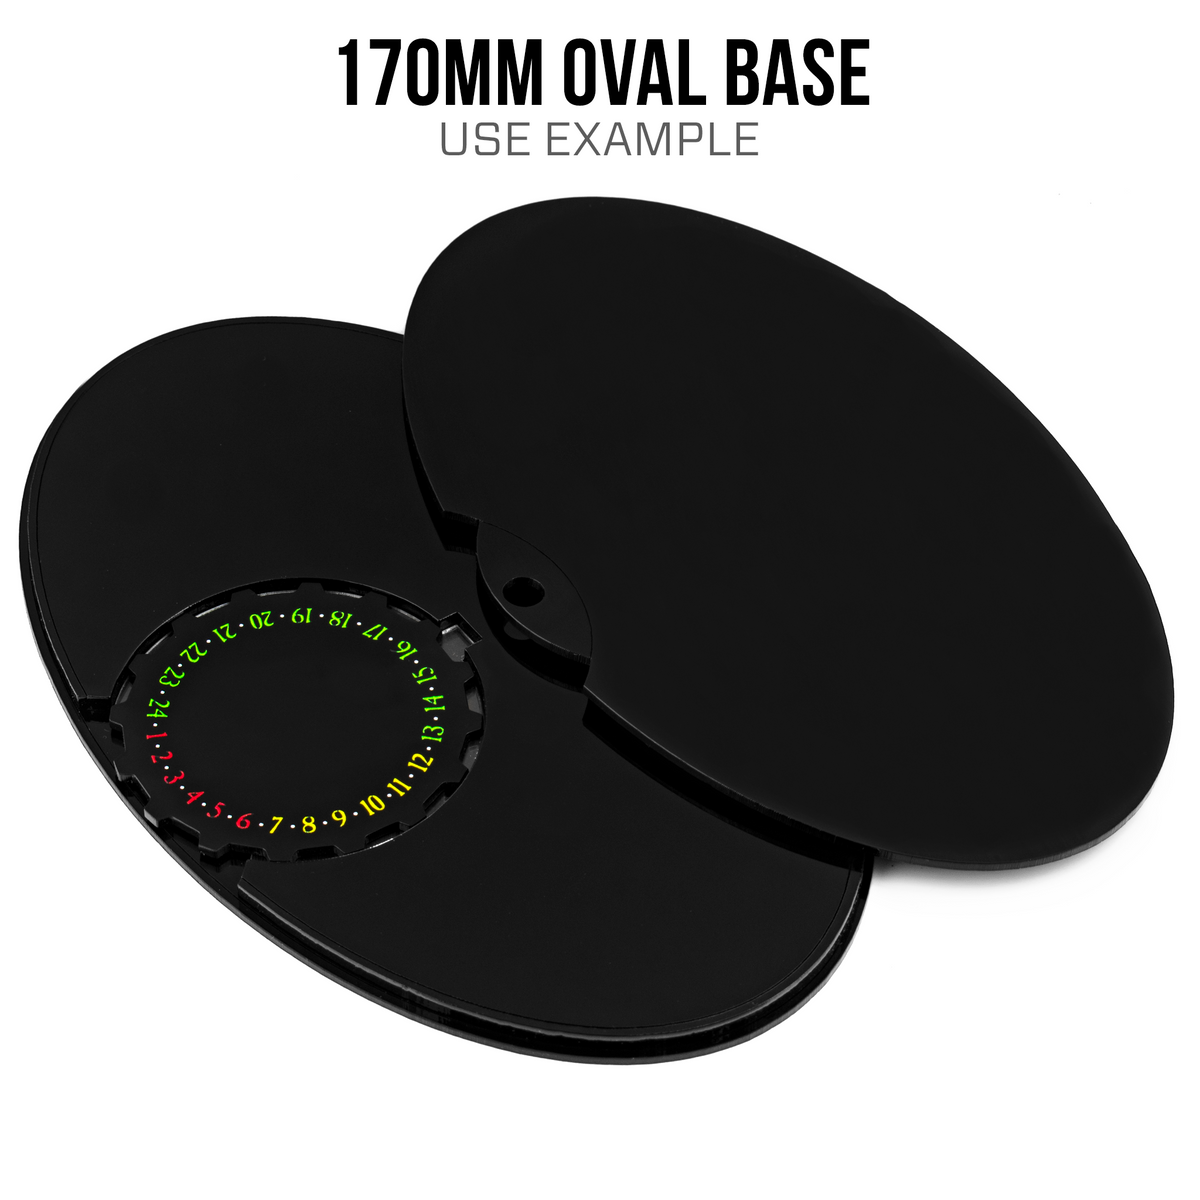 170mm Oval Base Wound Tracker